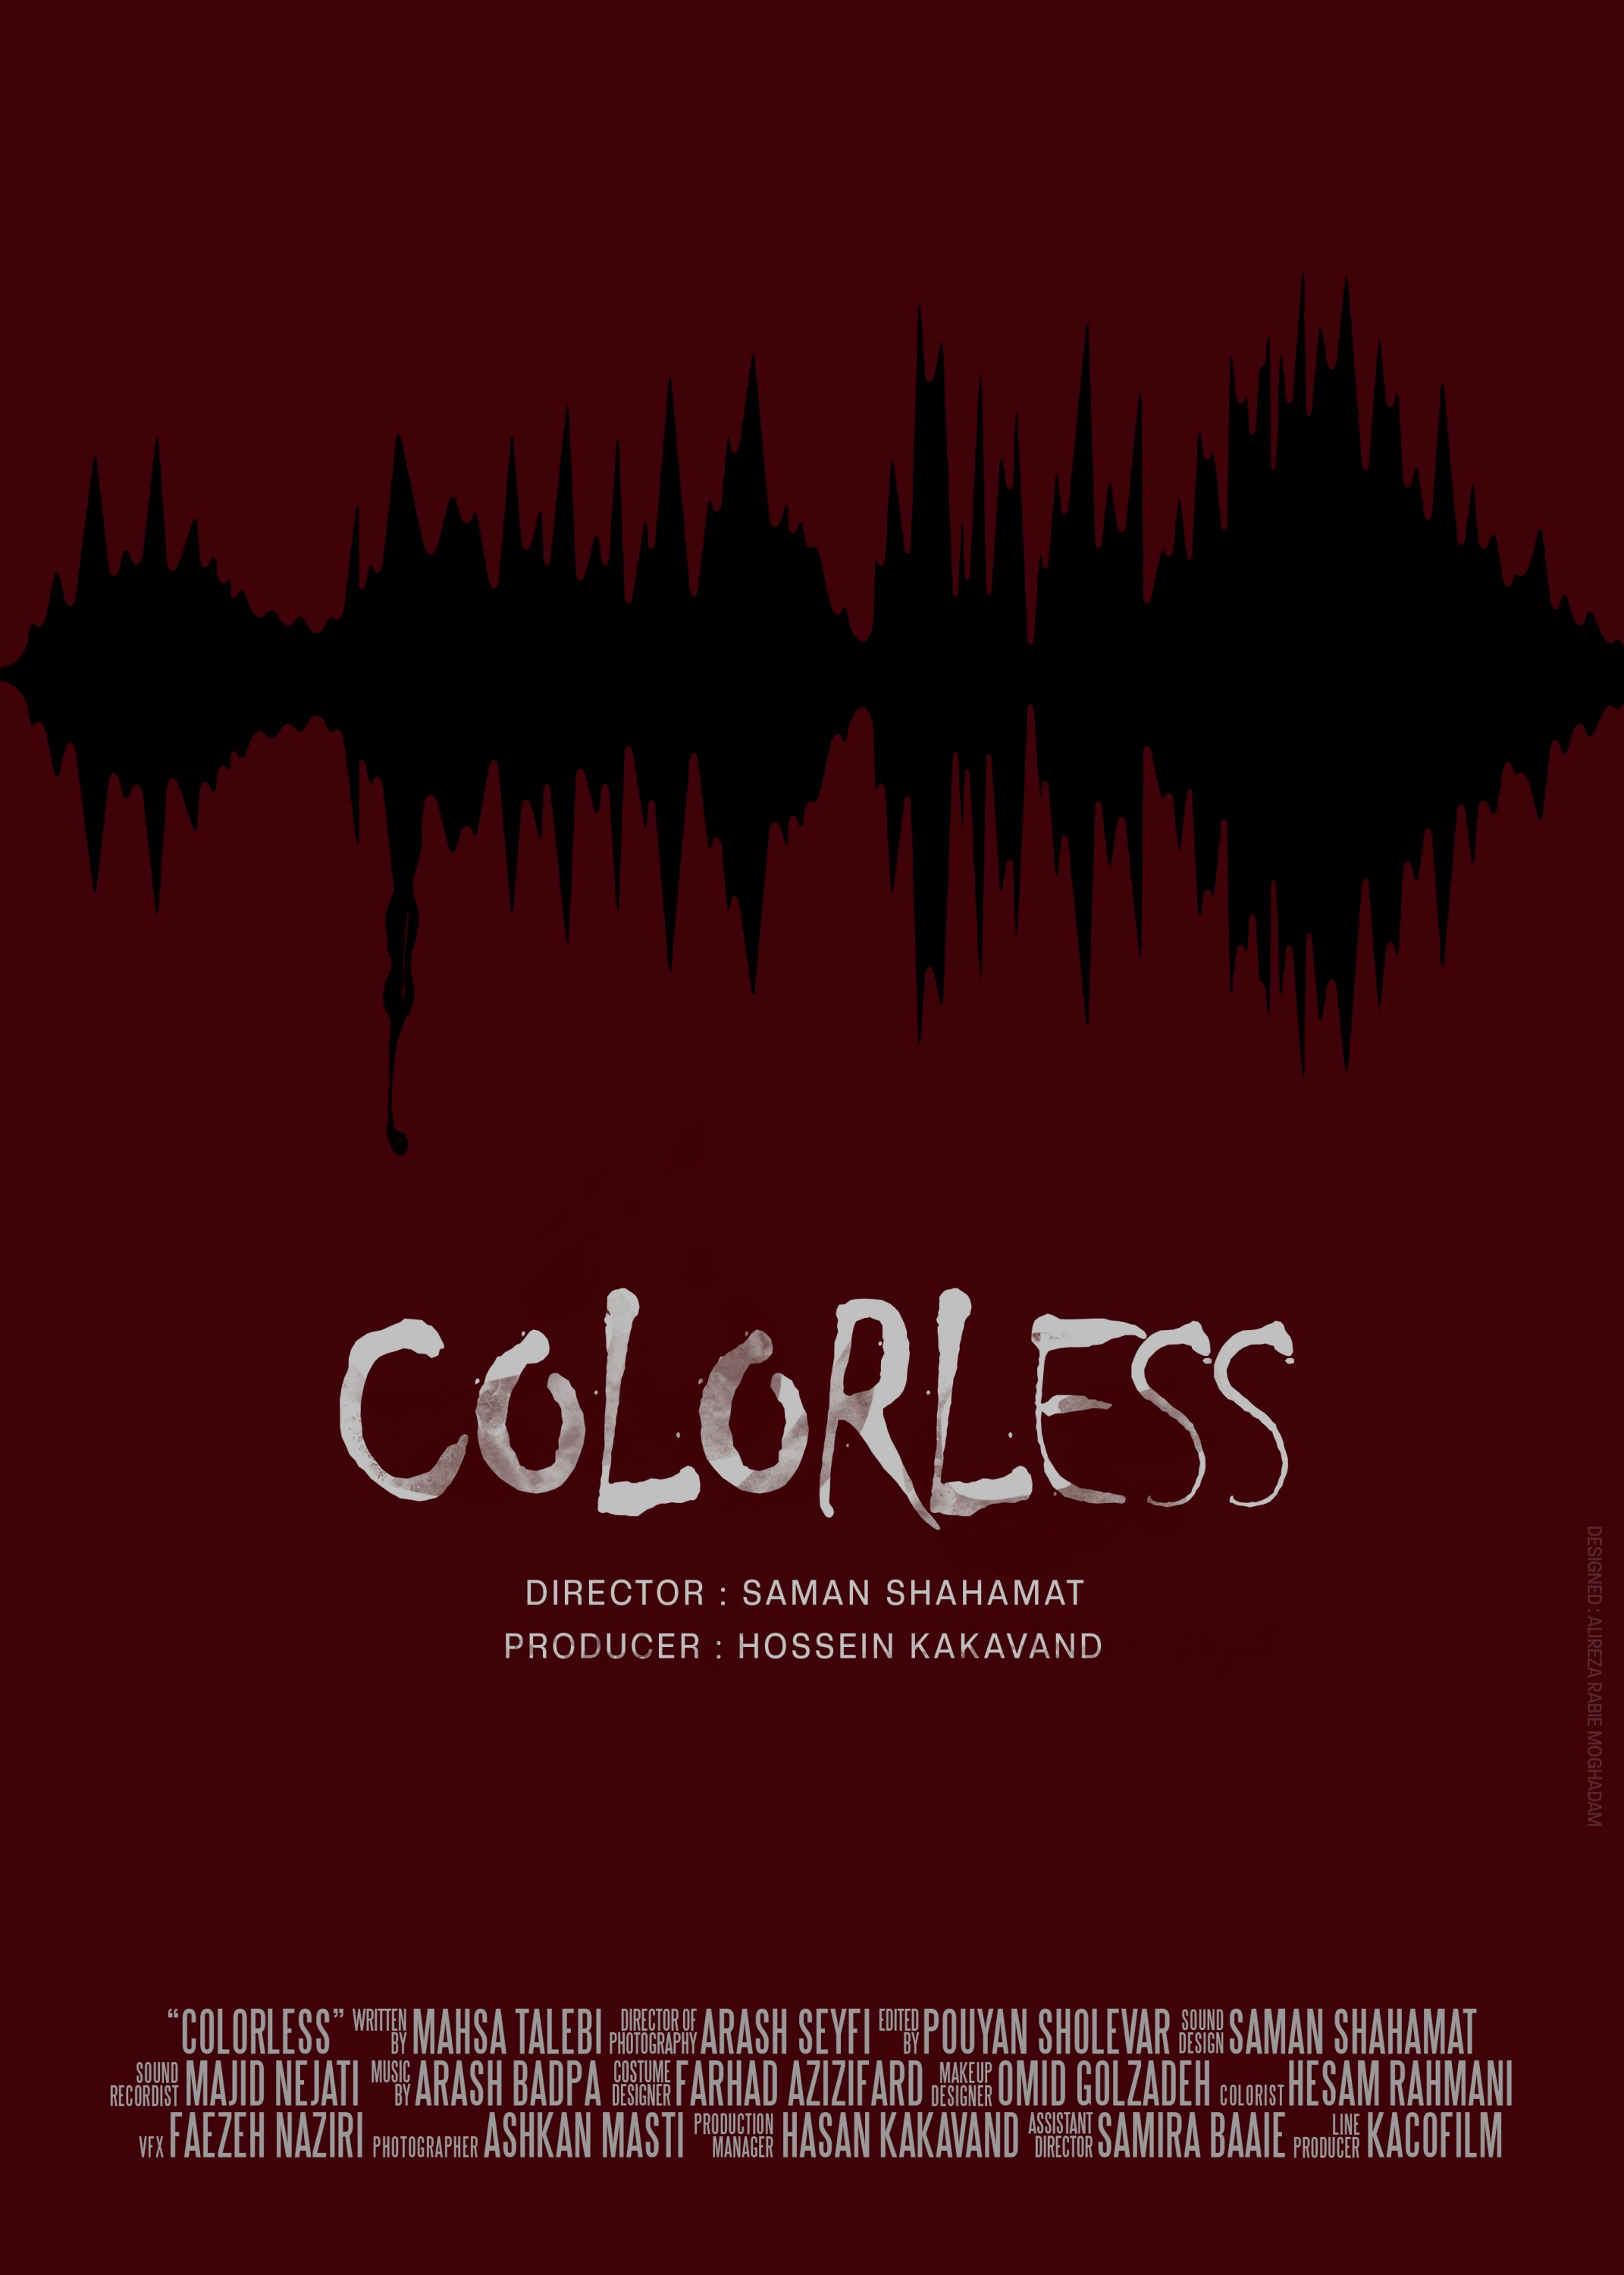 Mega Sized Movie Poster Image for Colorless